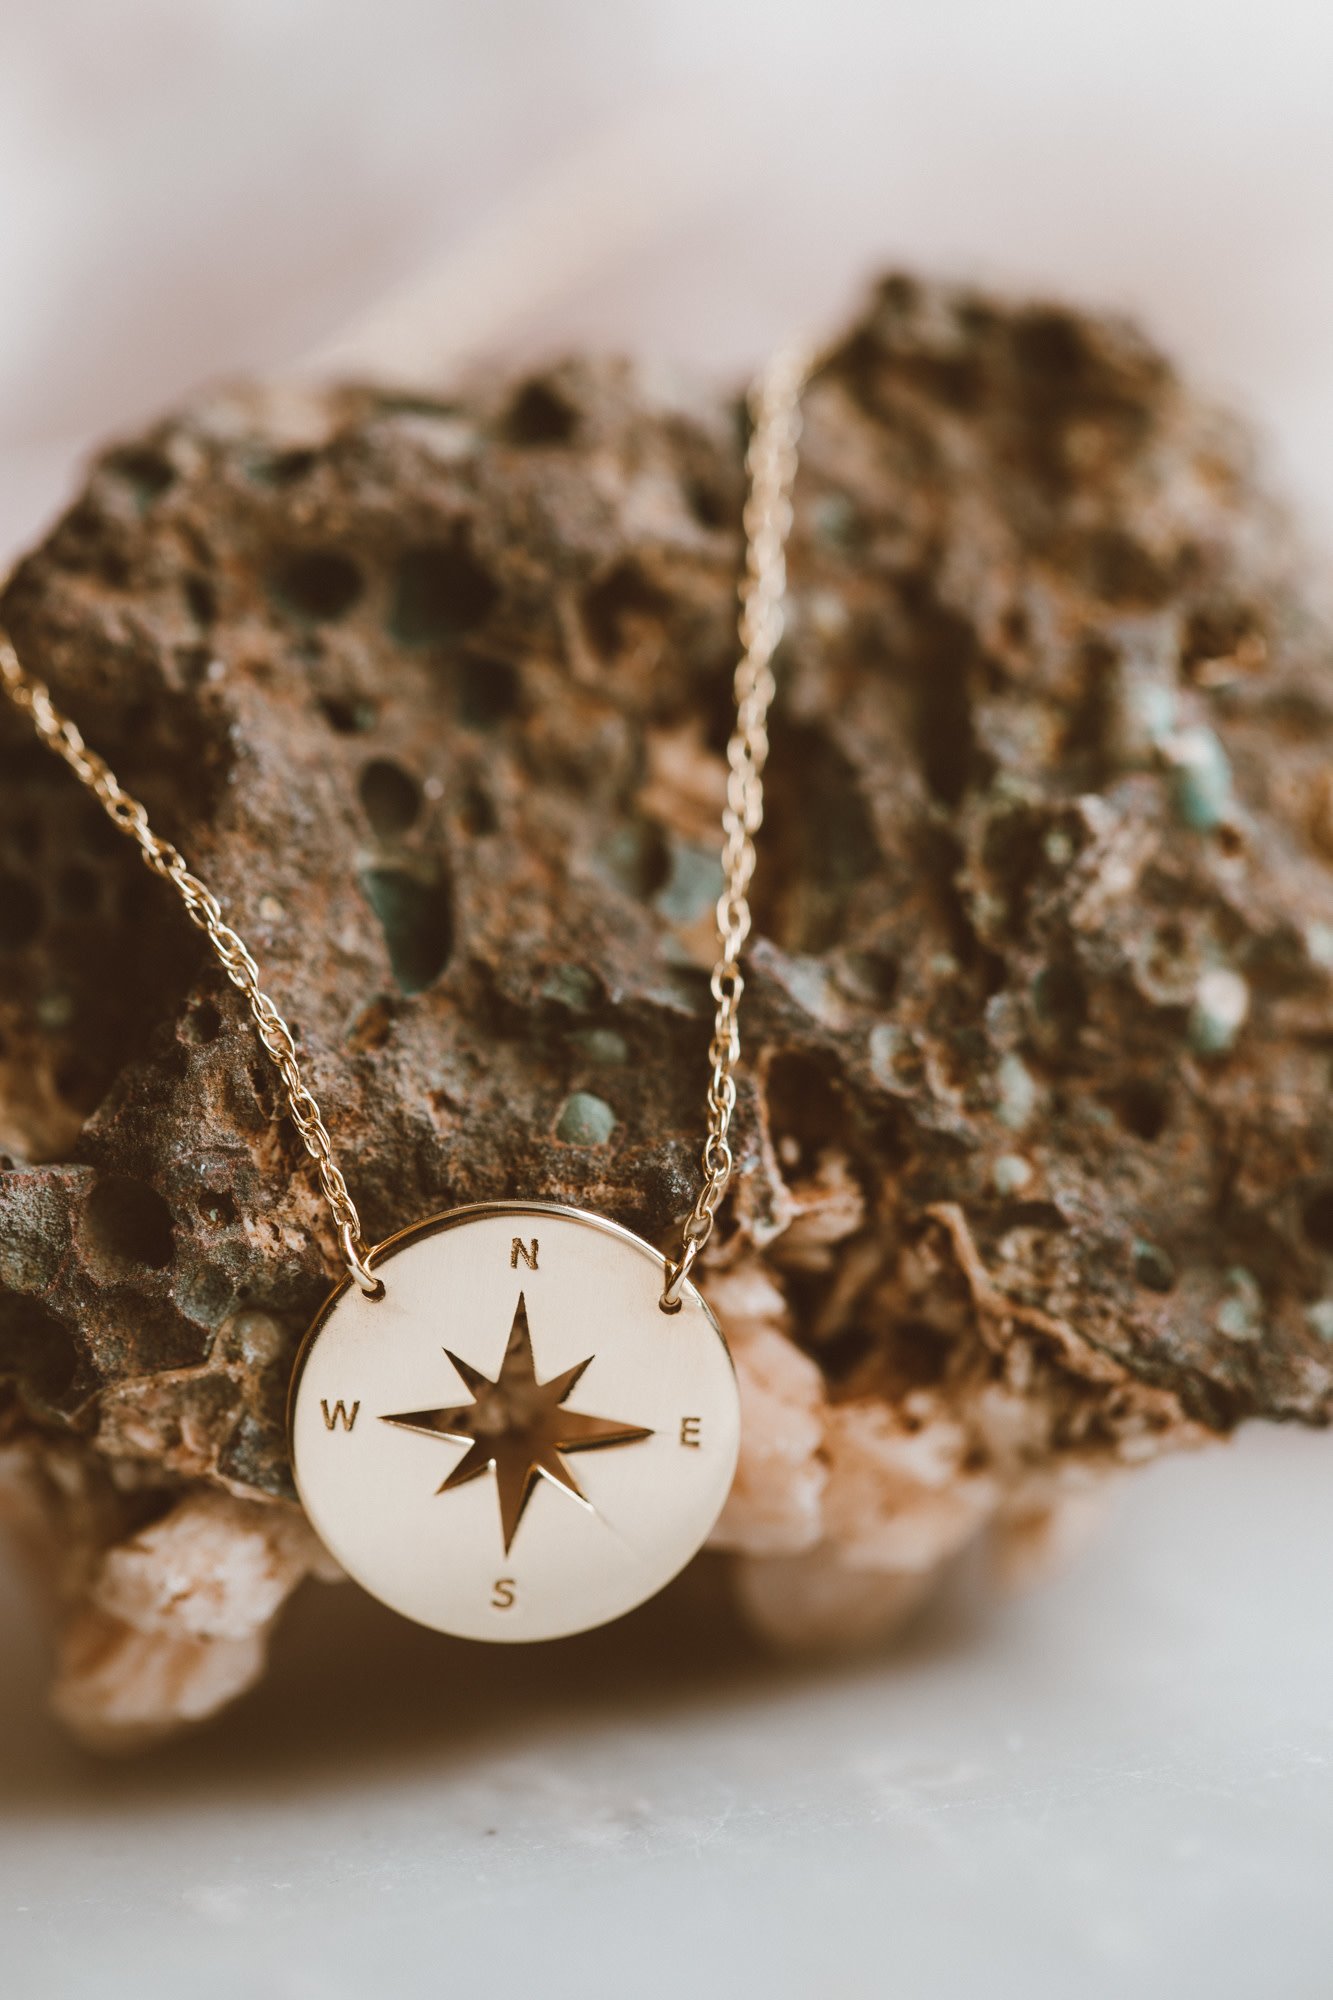 ASOS DESIGN necklace with compass pendant in 14k gold plate | ASOS